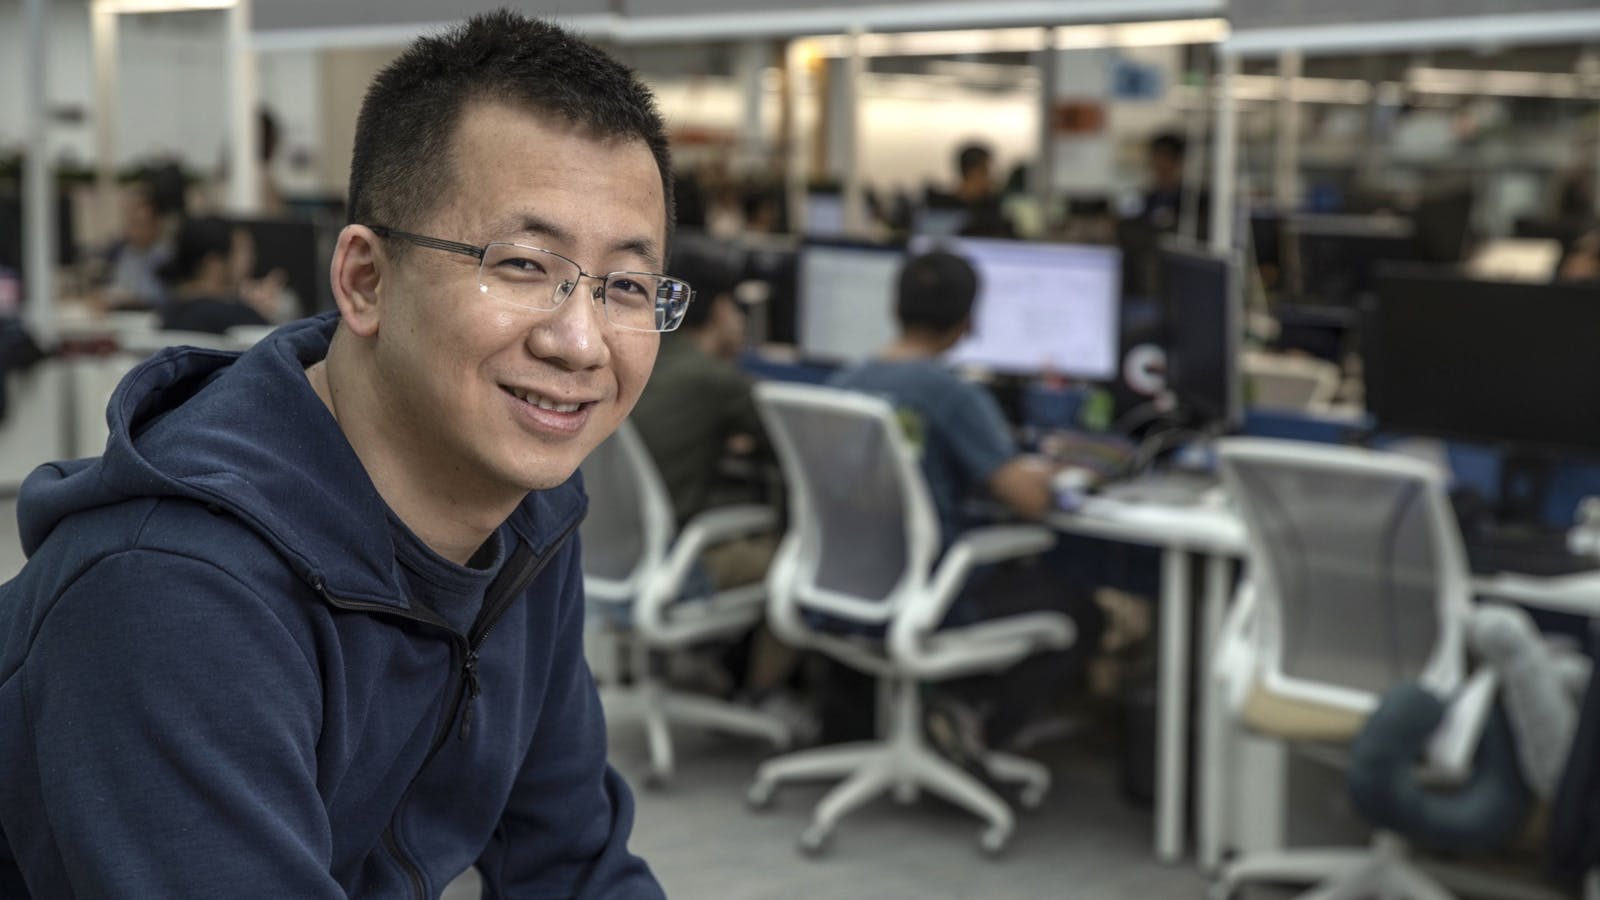 ByteDance CEO Zhang Yiming. Photo by Bloomberg